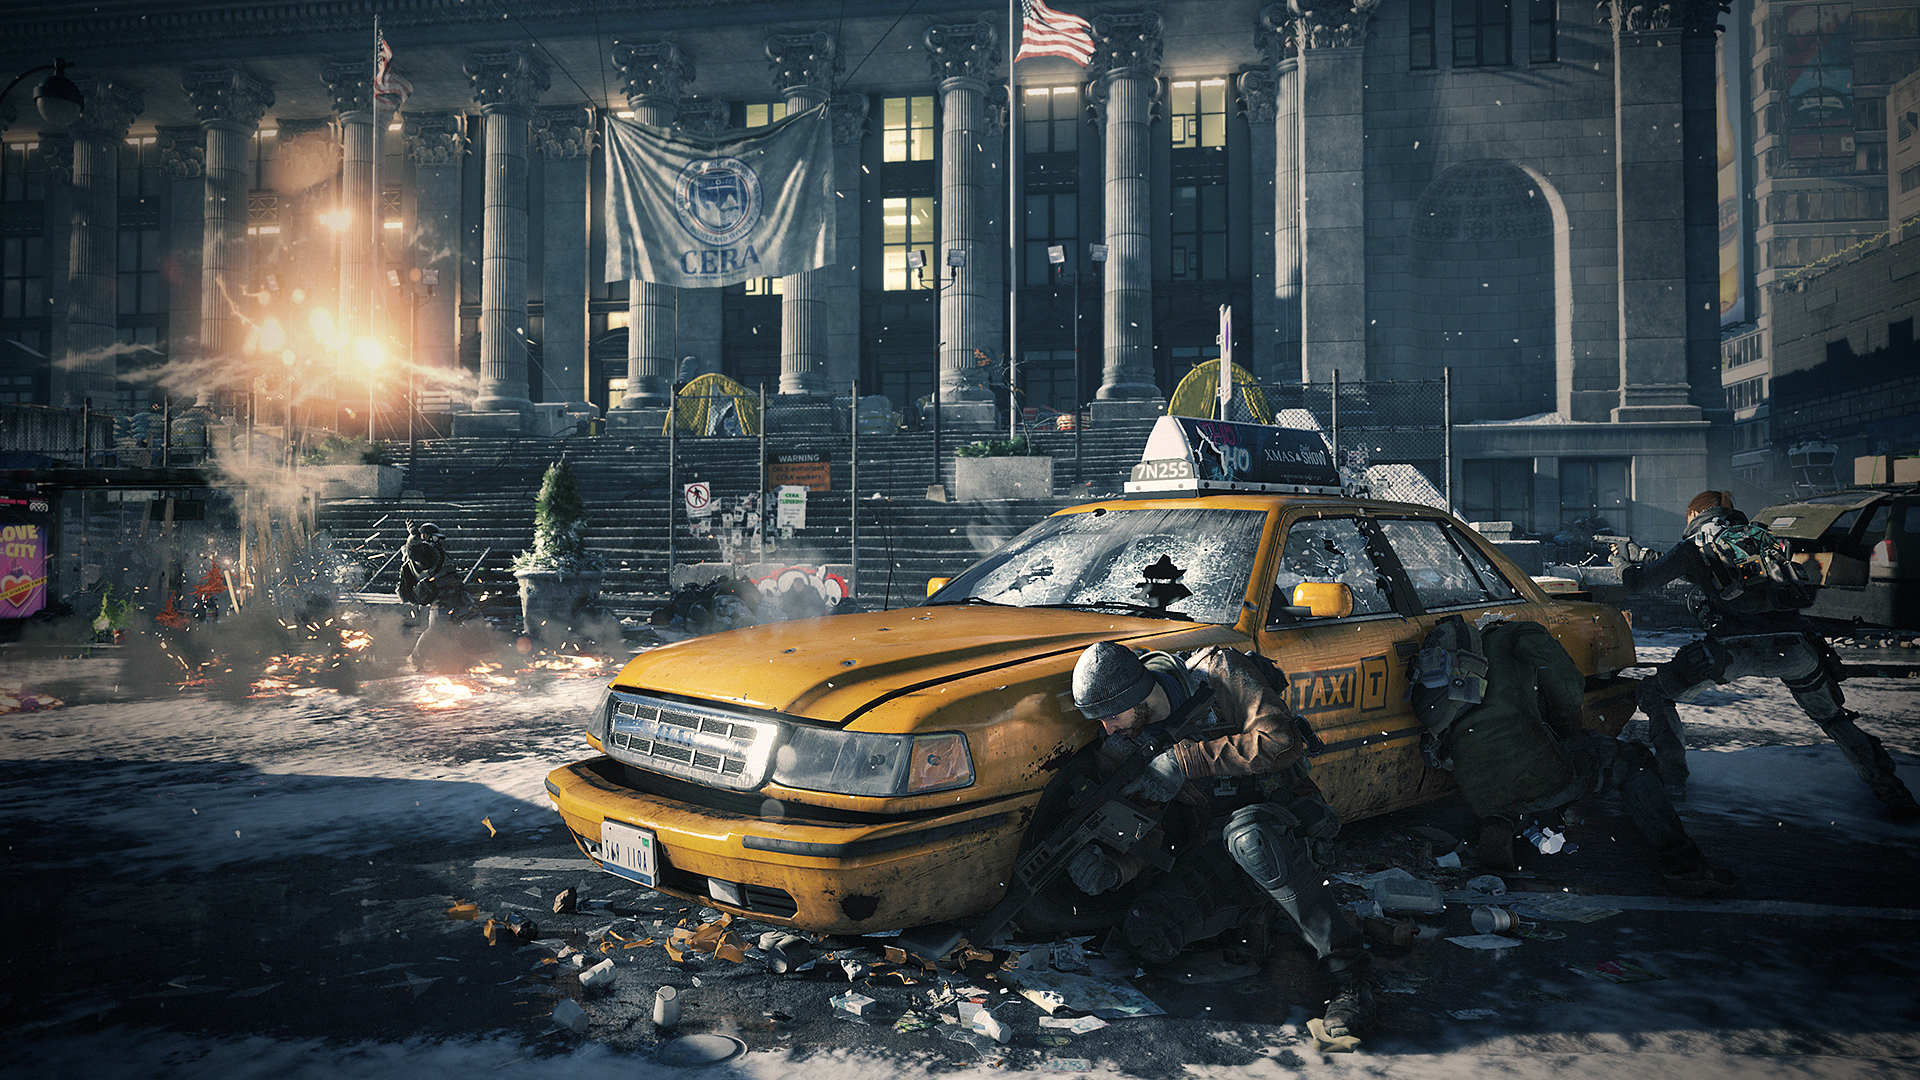 Tom Clancy's The Division #3